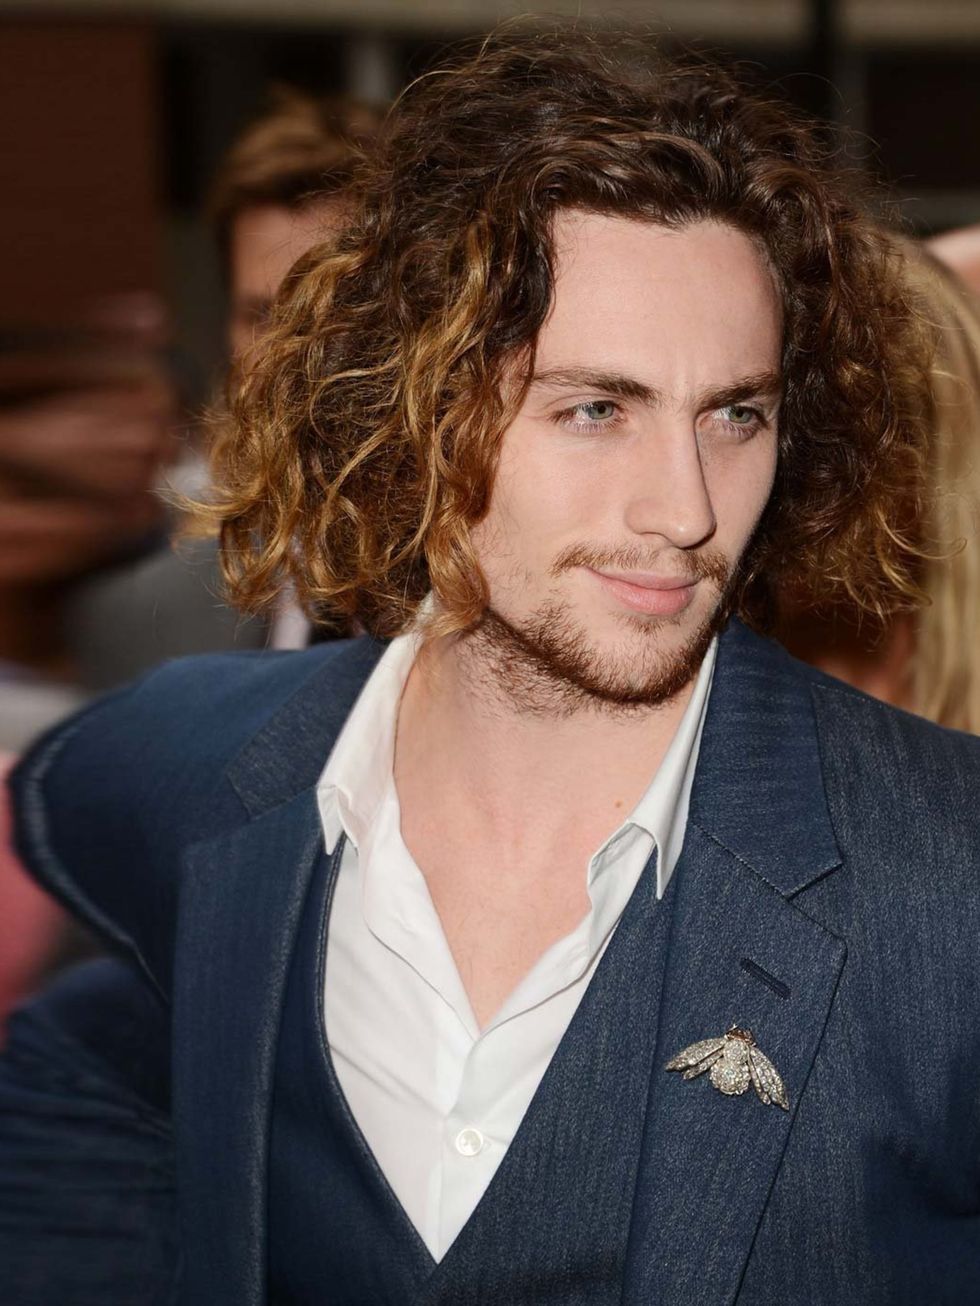 <p>We'd love to know which hair products <a href="http://www.elleuk.com/star-style/news/aaron-taylor-johnson-keeps-mum-about-his-film-roles">ATJ</a>'s using</p><p><em>Aaron Taylor-Johnson, interview October 2012 issue</em></p>